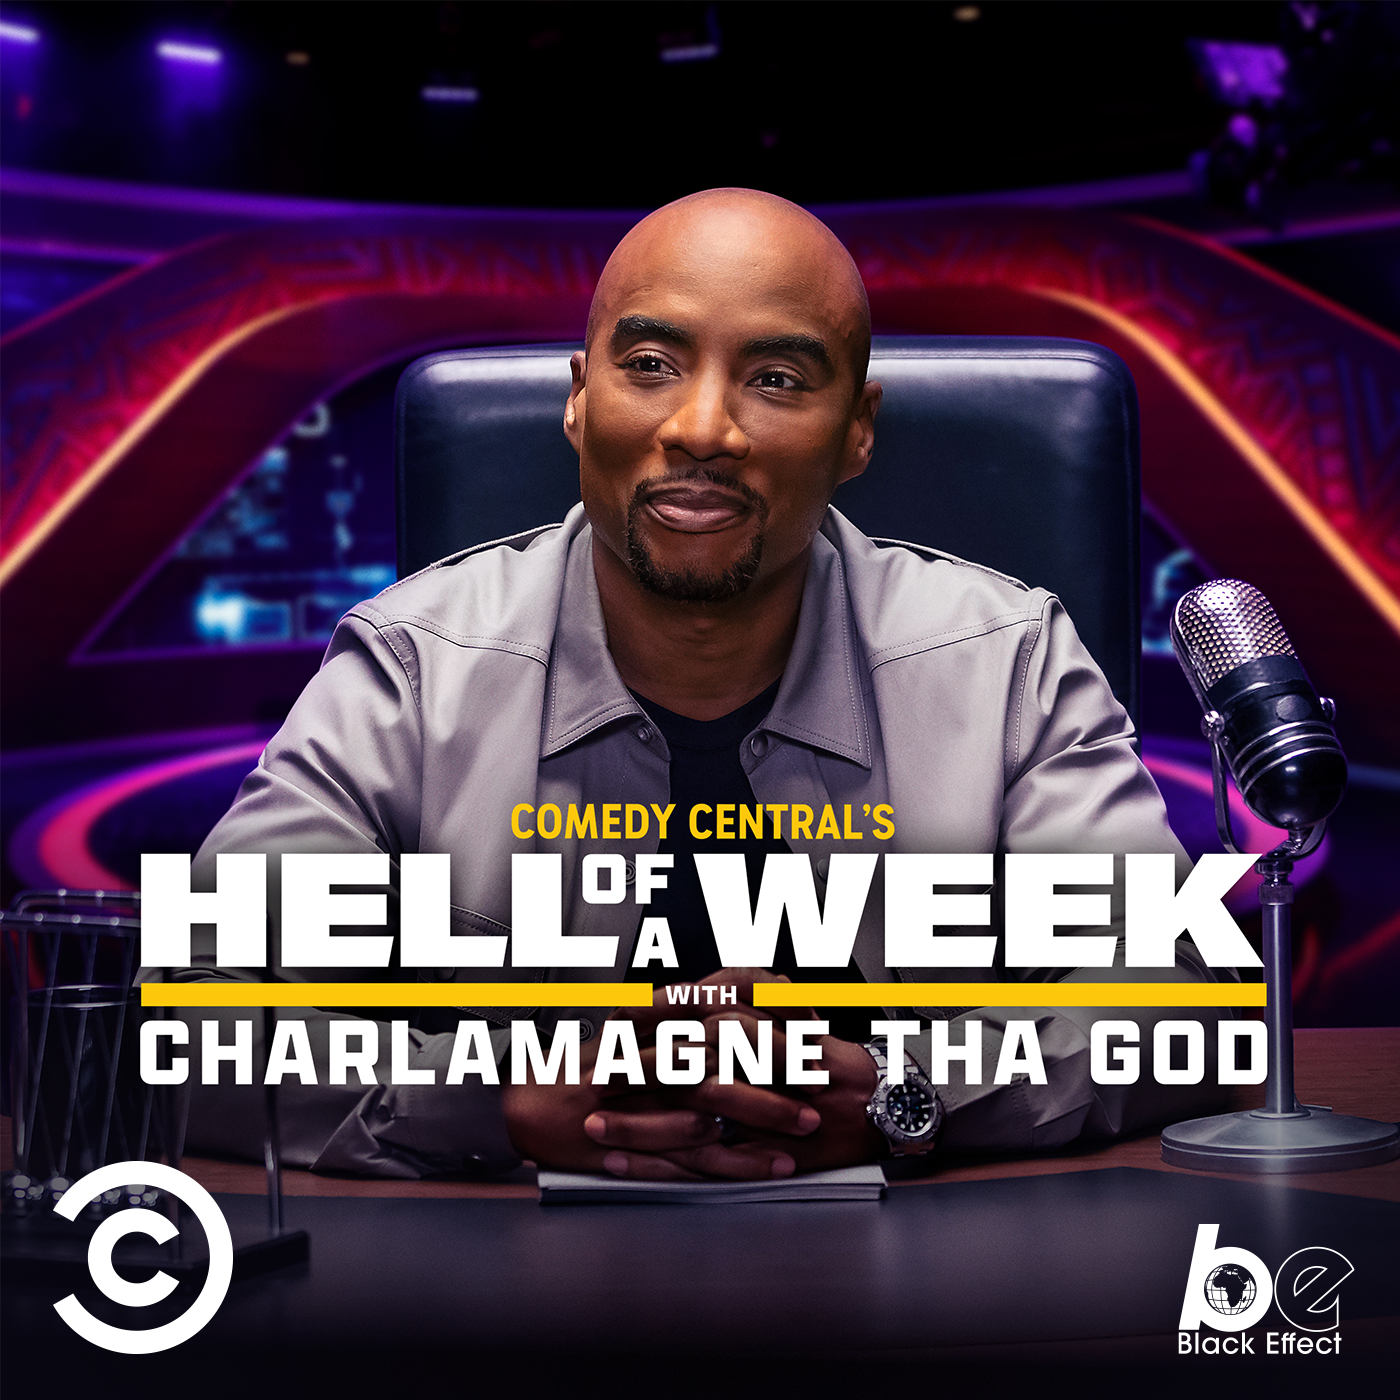 Introducing: Comedy Central’s Hell Of A Week with Charlamagne Tha God